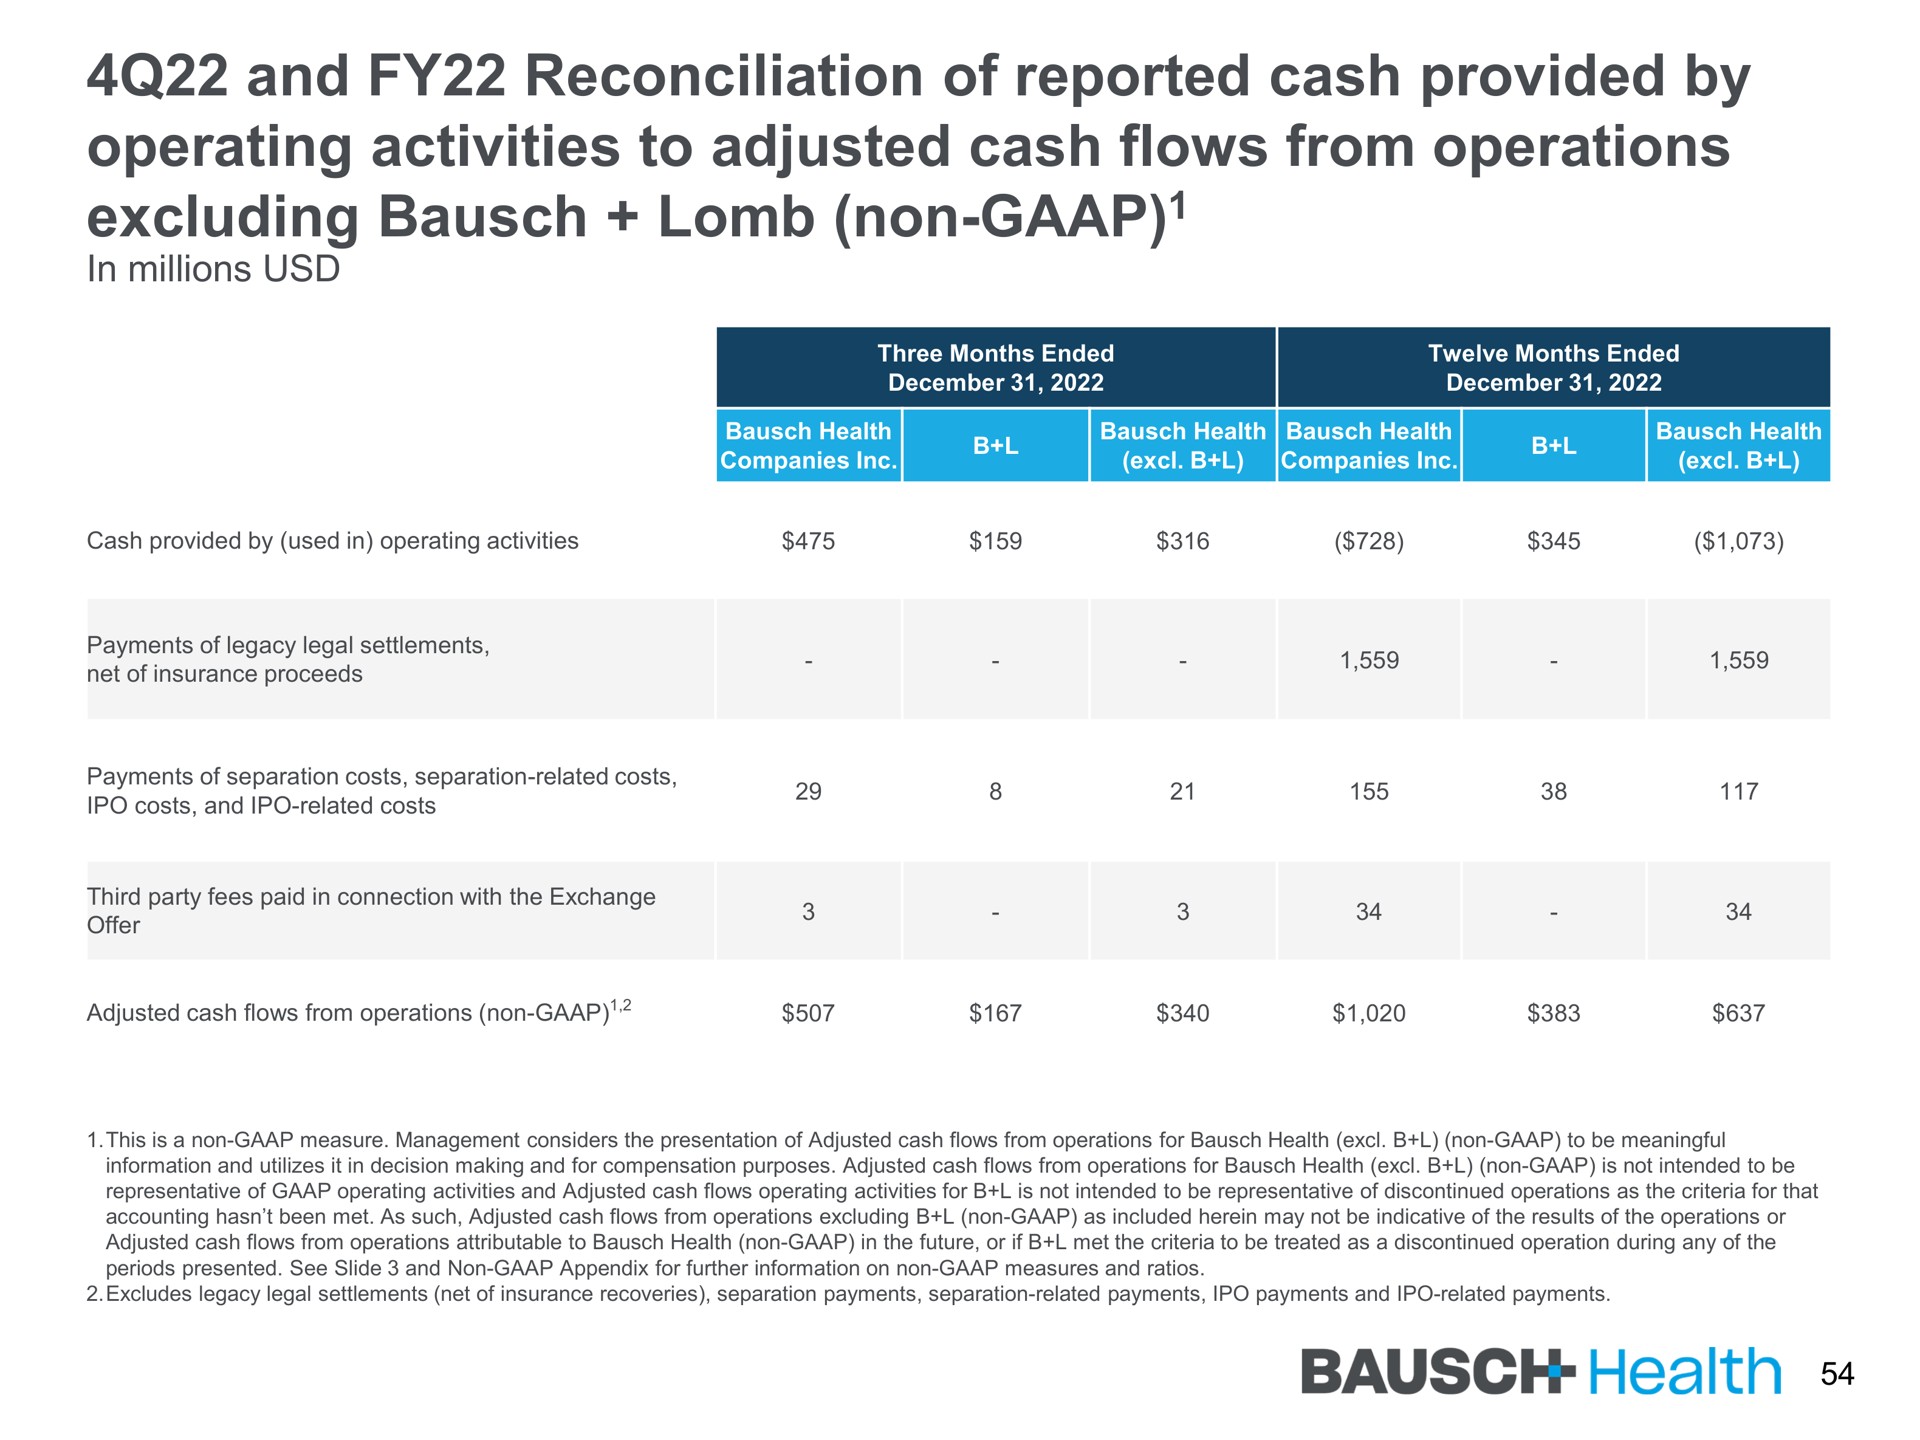 and reconciliation of reported cash provided by operating activities to adjusted cash flows from operations excluding non health | Bausch Health Companies